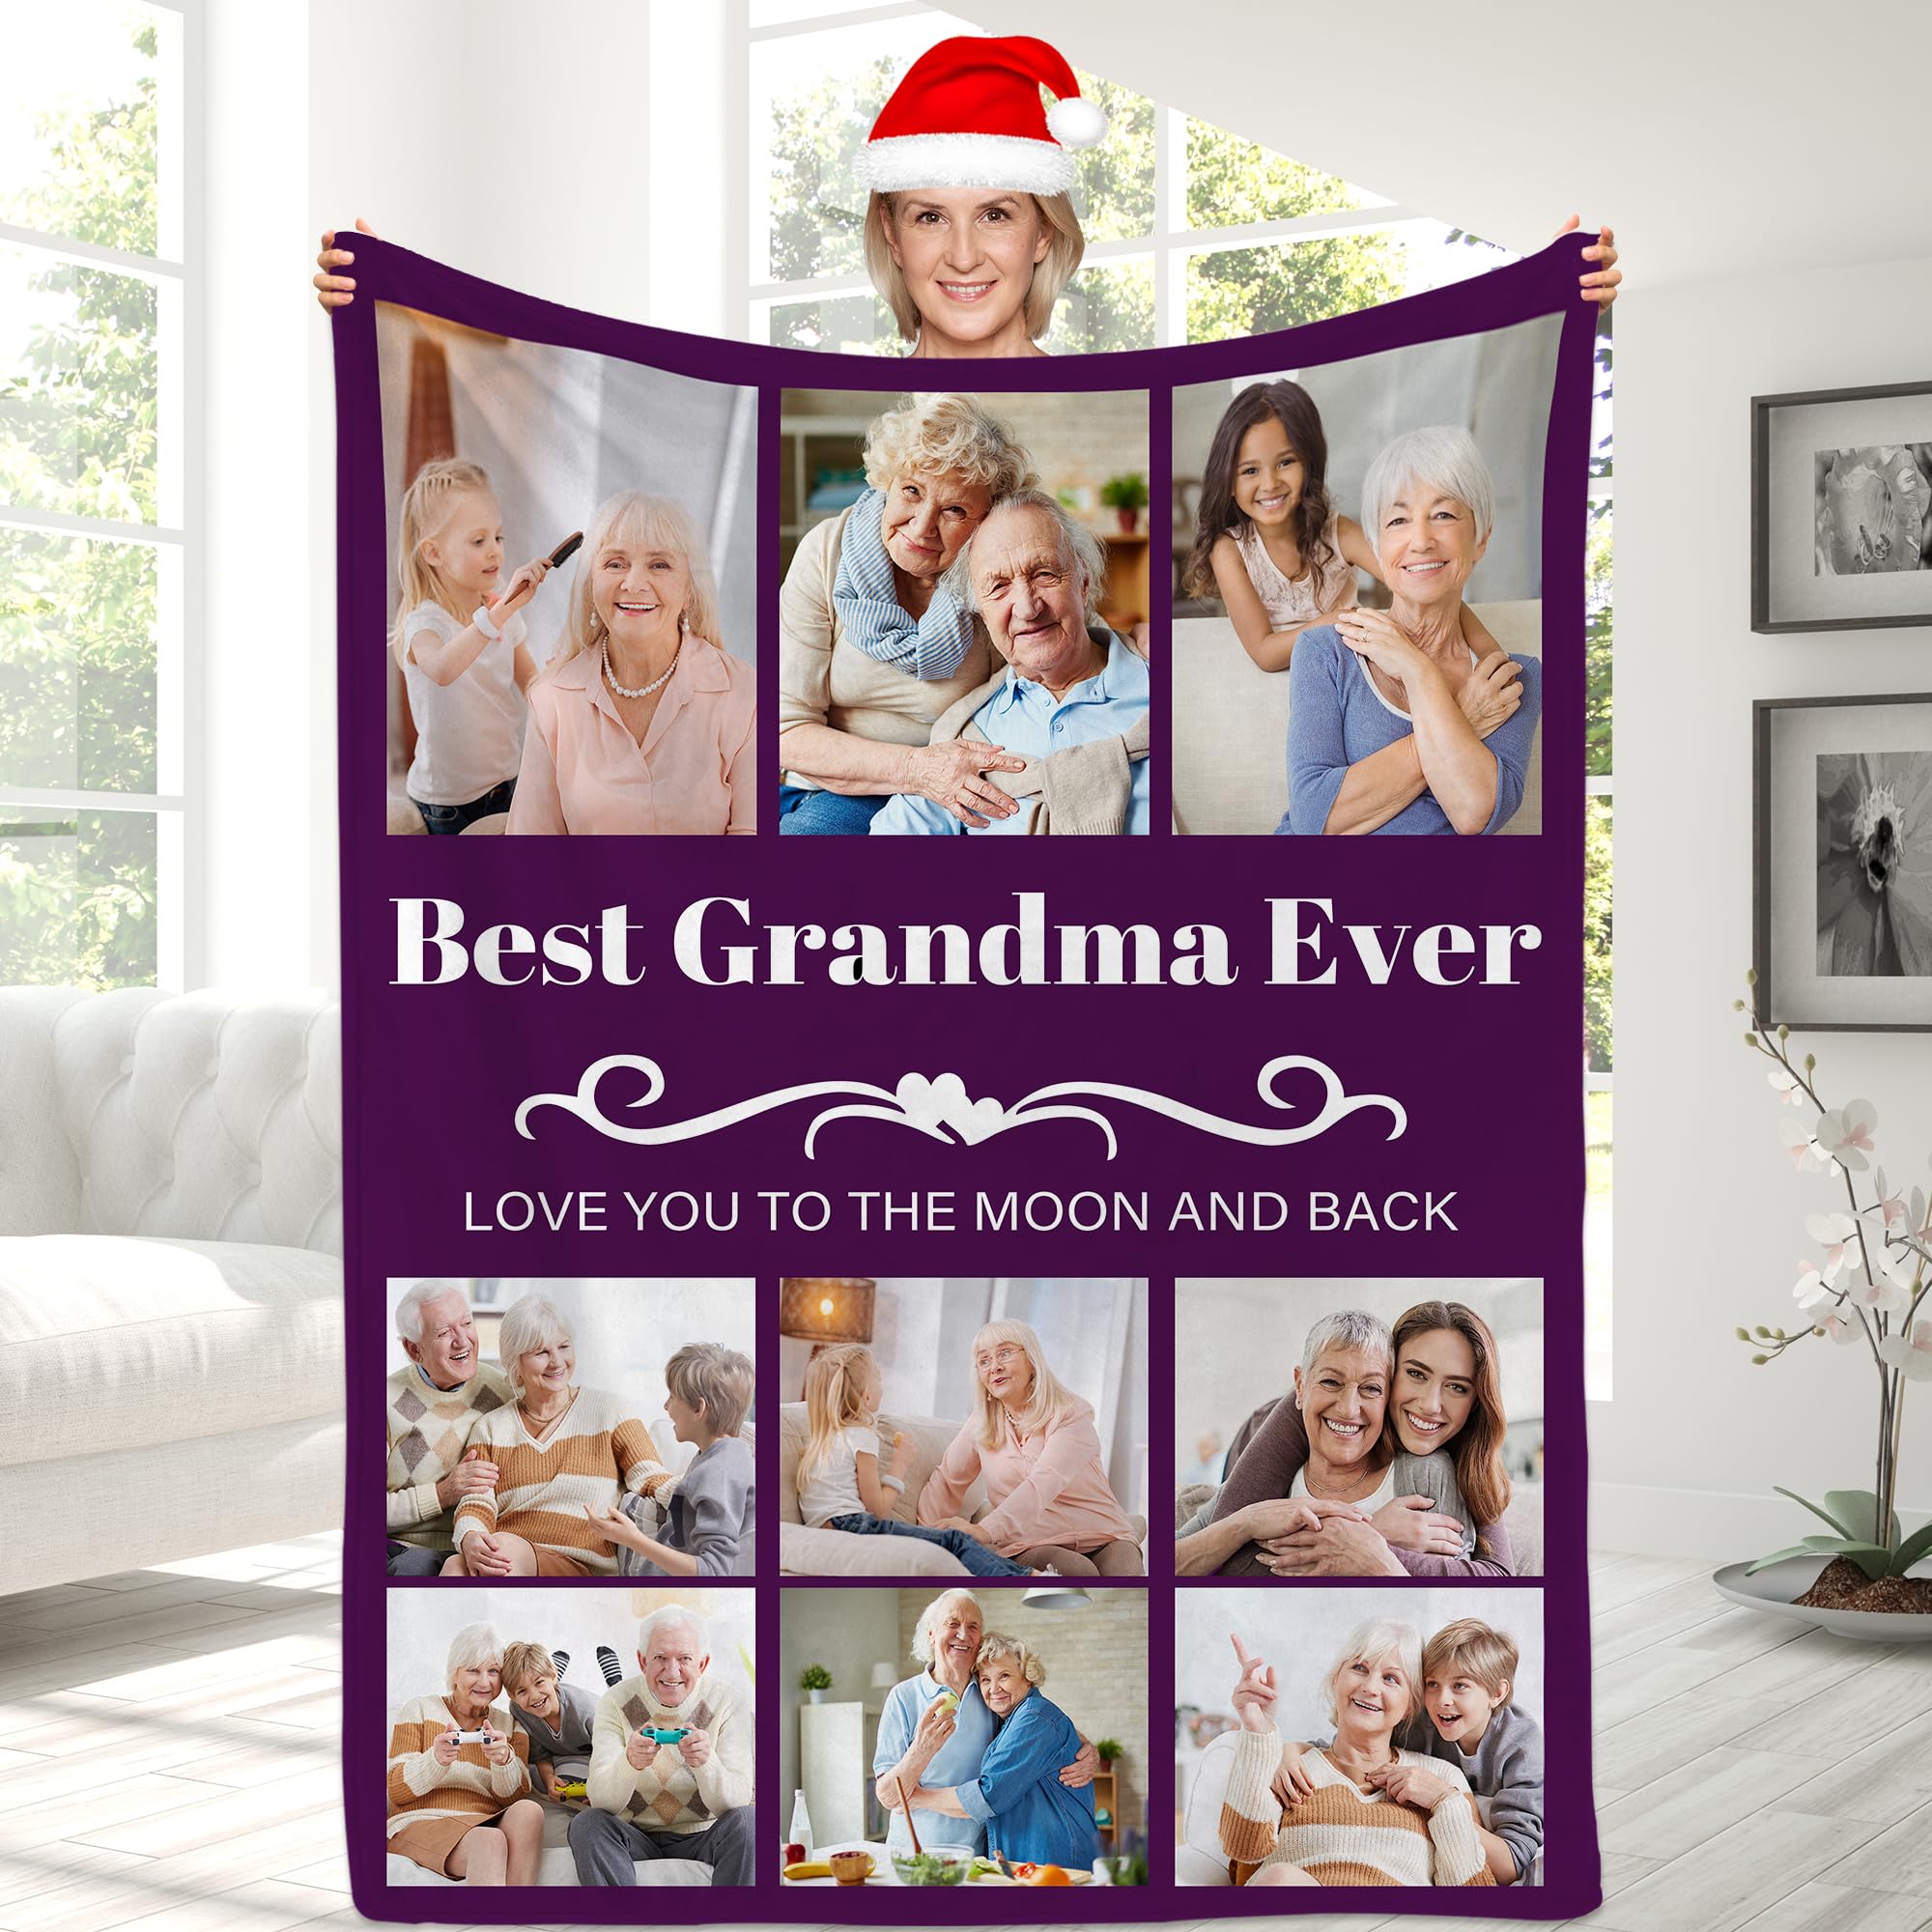 Magimagine Personalized Photo Blanket to My Grandma from Granddaughter Grandson, Personalized Blanket Gift Idea for Grandma, Birthday Gifts